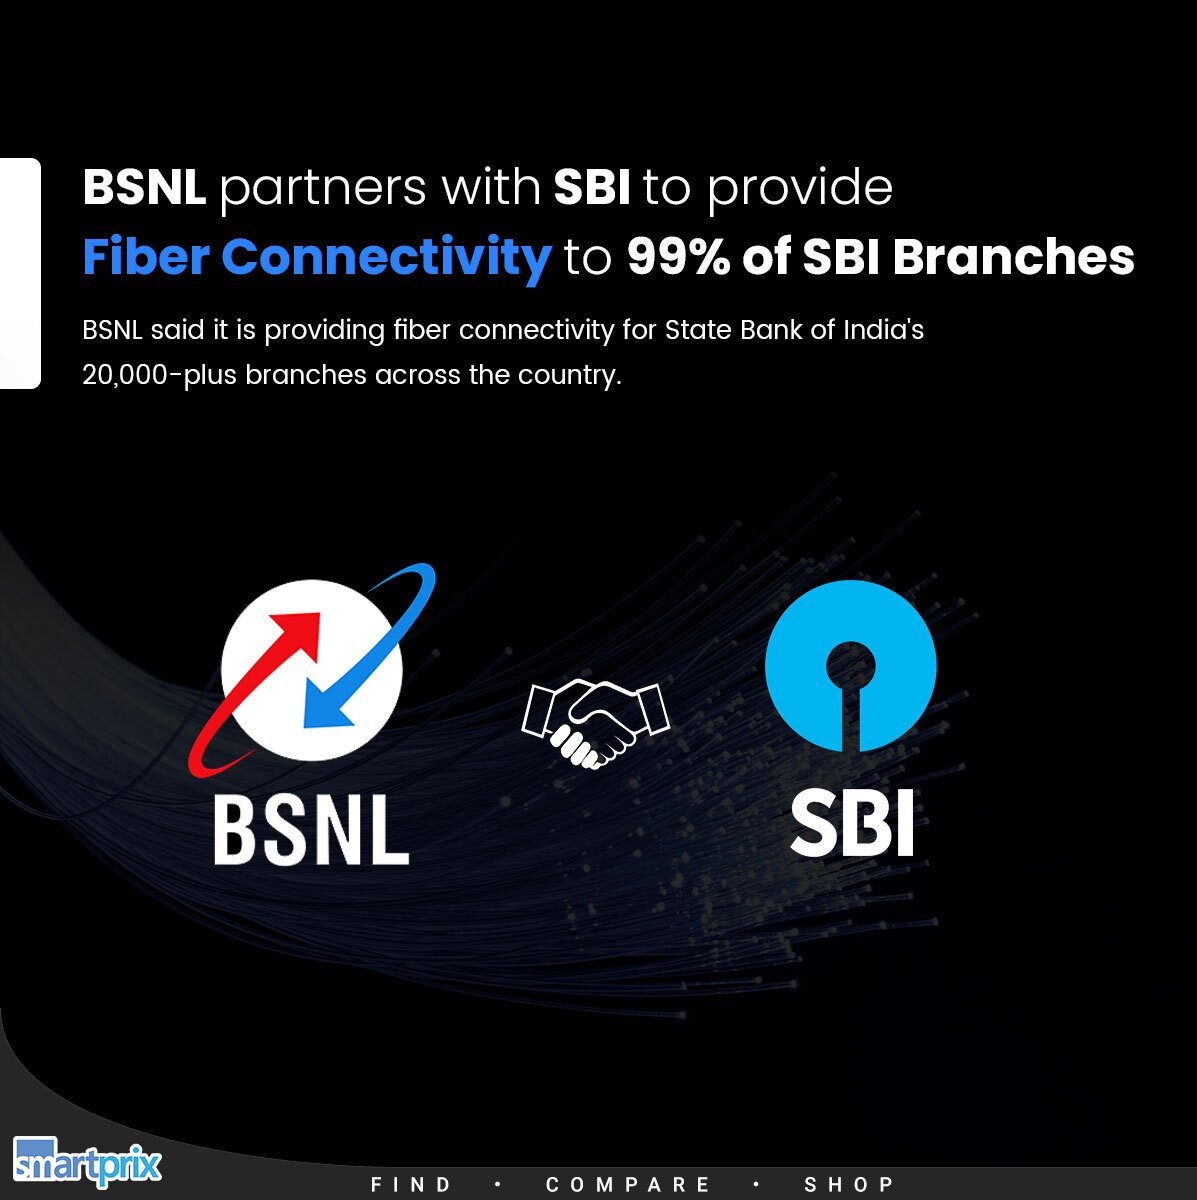 BSNL and SBI join hands partner to fiberize 20,000-plus branches across the country

#BSNL #SBI #Fiber #FiberConnectivity